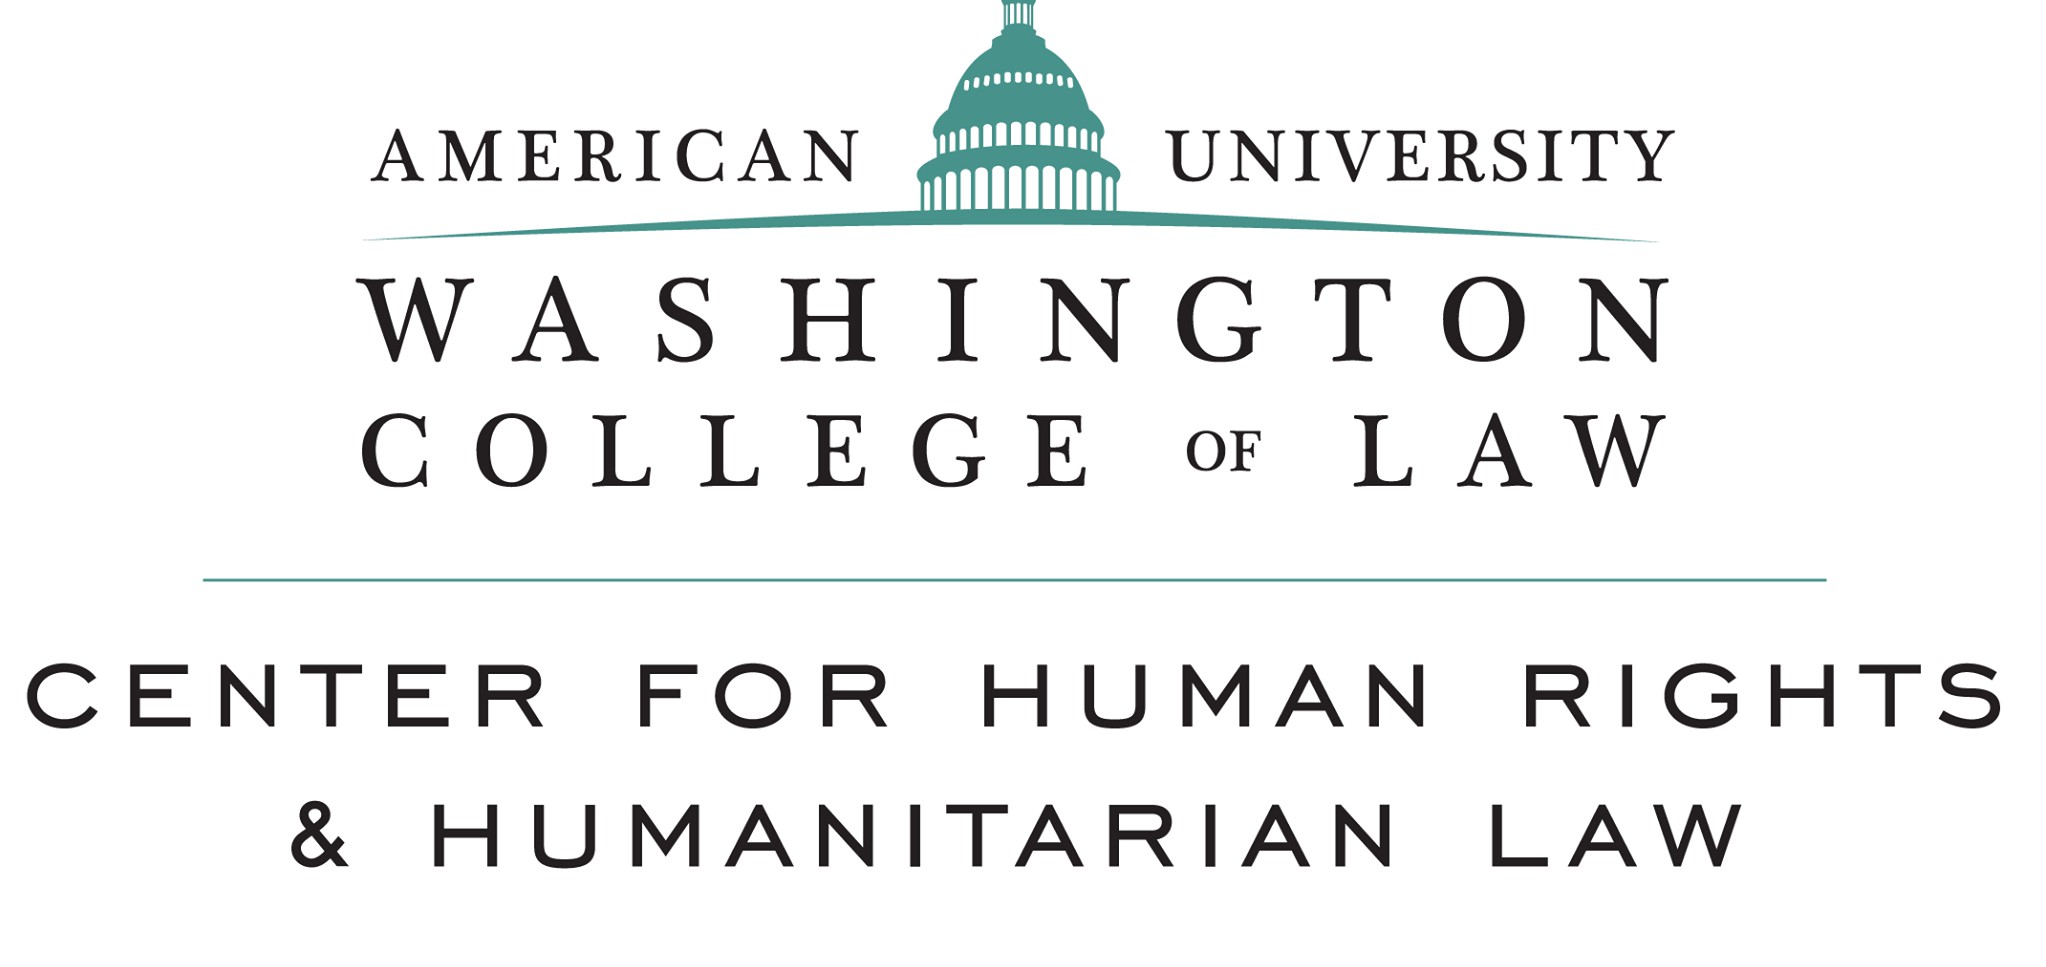 Center for Human Rights and Humanitarian Law